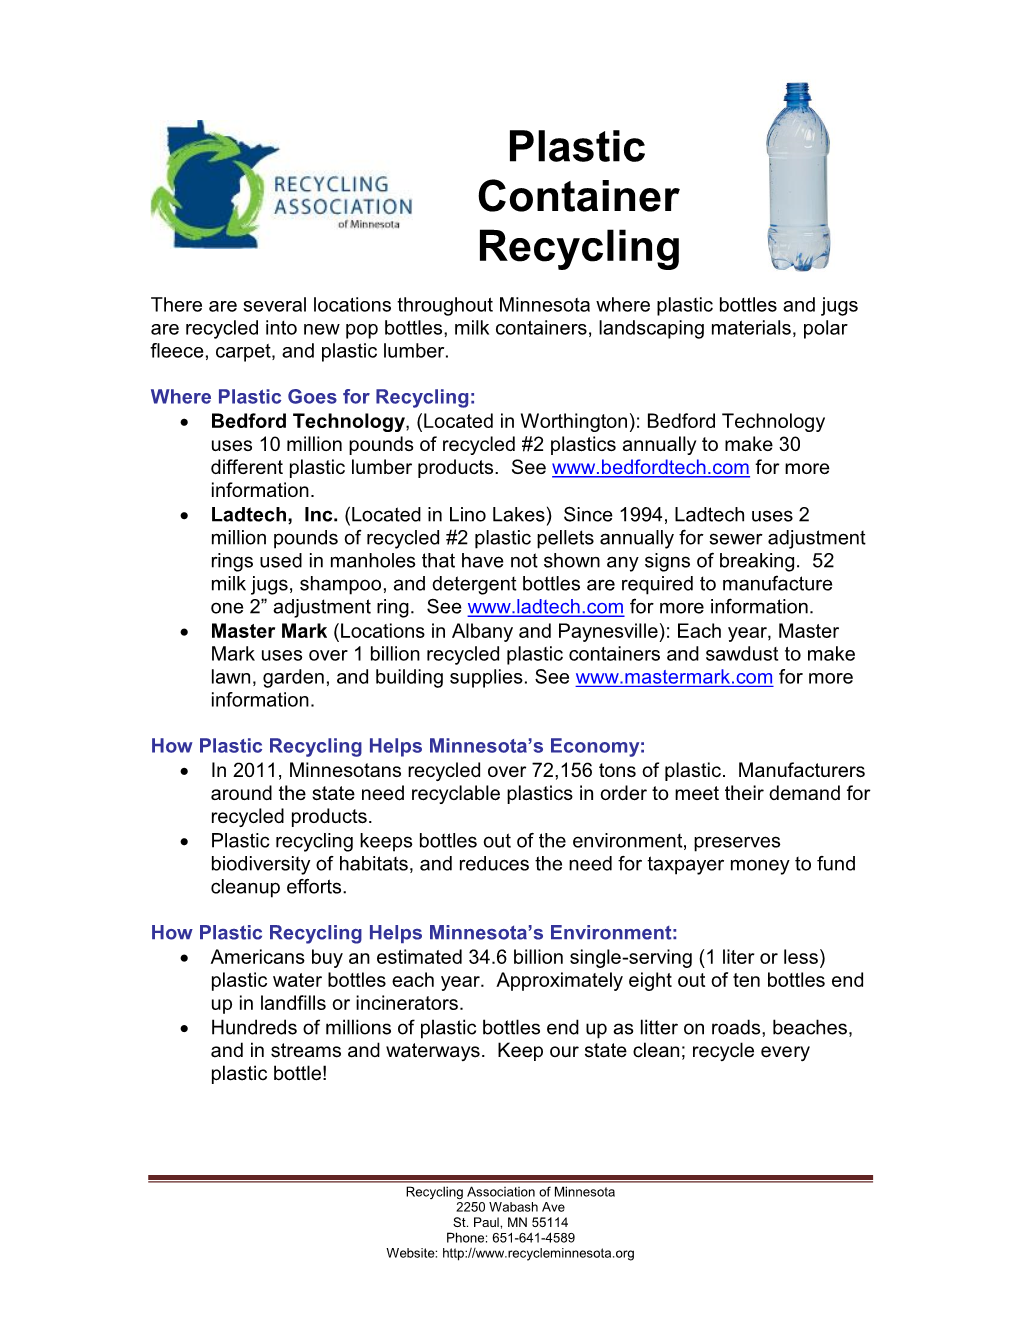 Plastic Container Recycling Fact Sheet